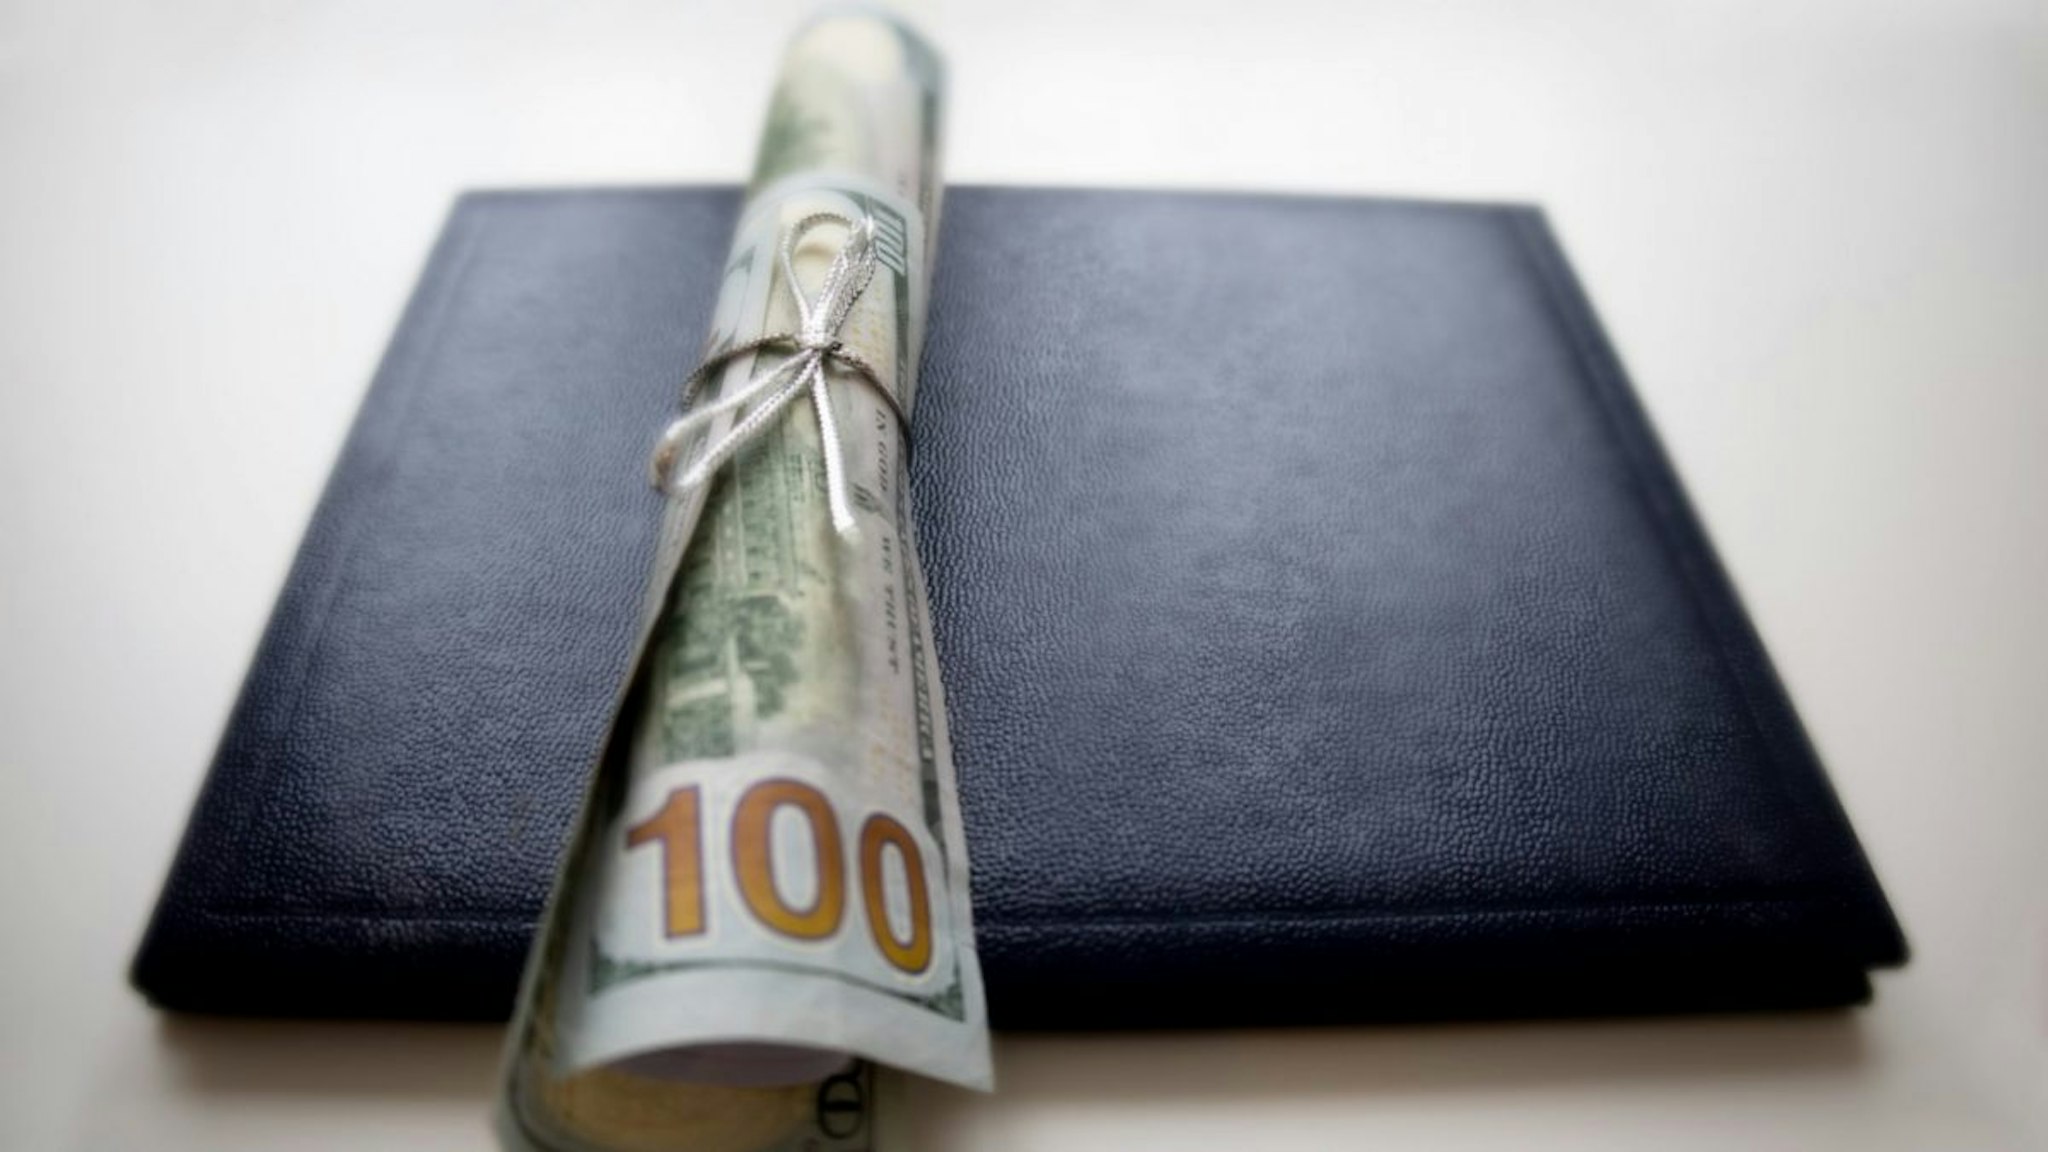 School diploma wrapped in $100 bills & traditional leather diploma binder - stock photo.